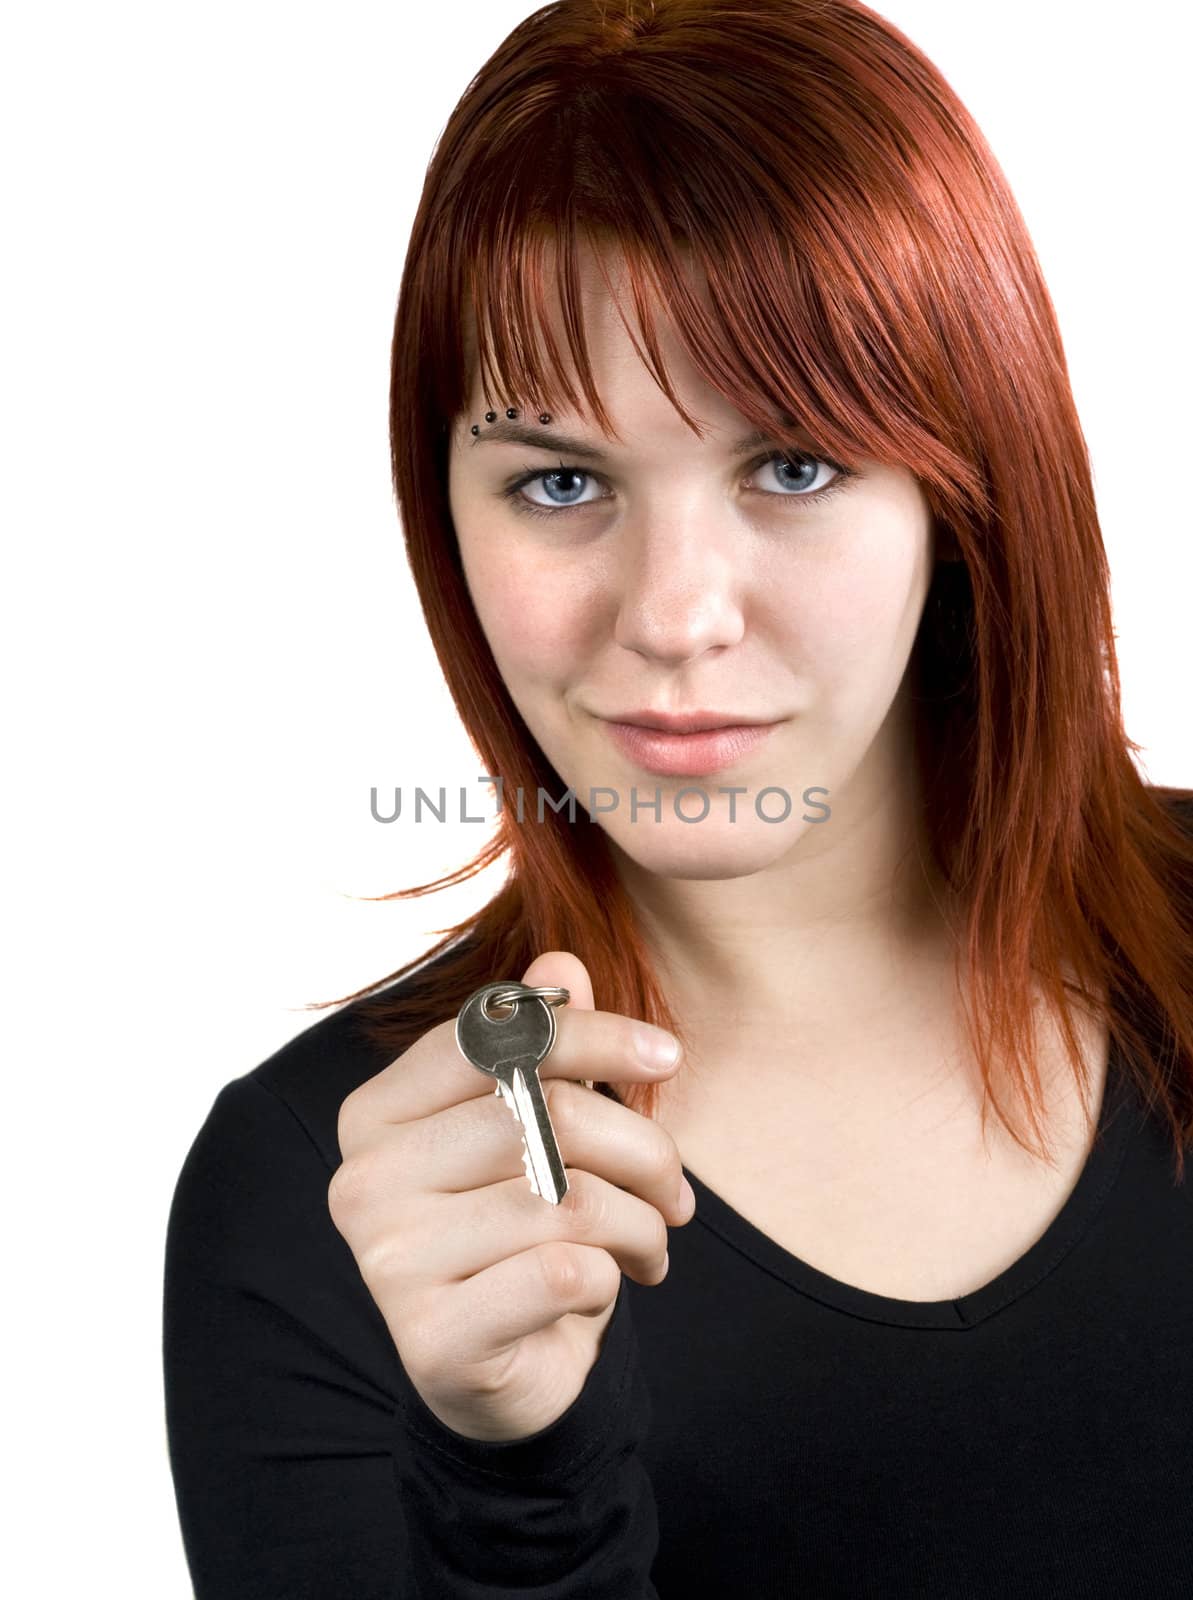 Cute redhead girl holding a key in her hands.

Studio shot.